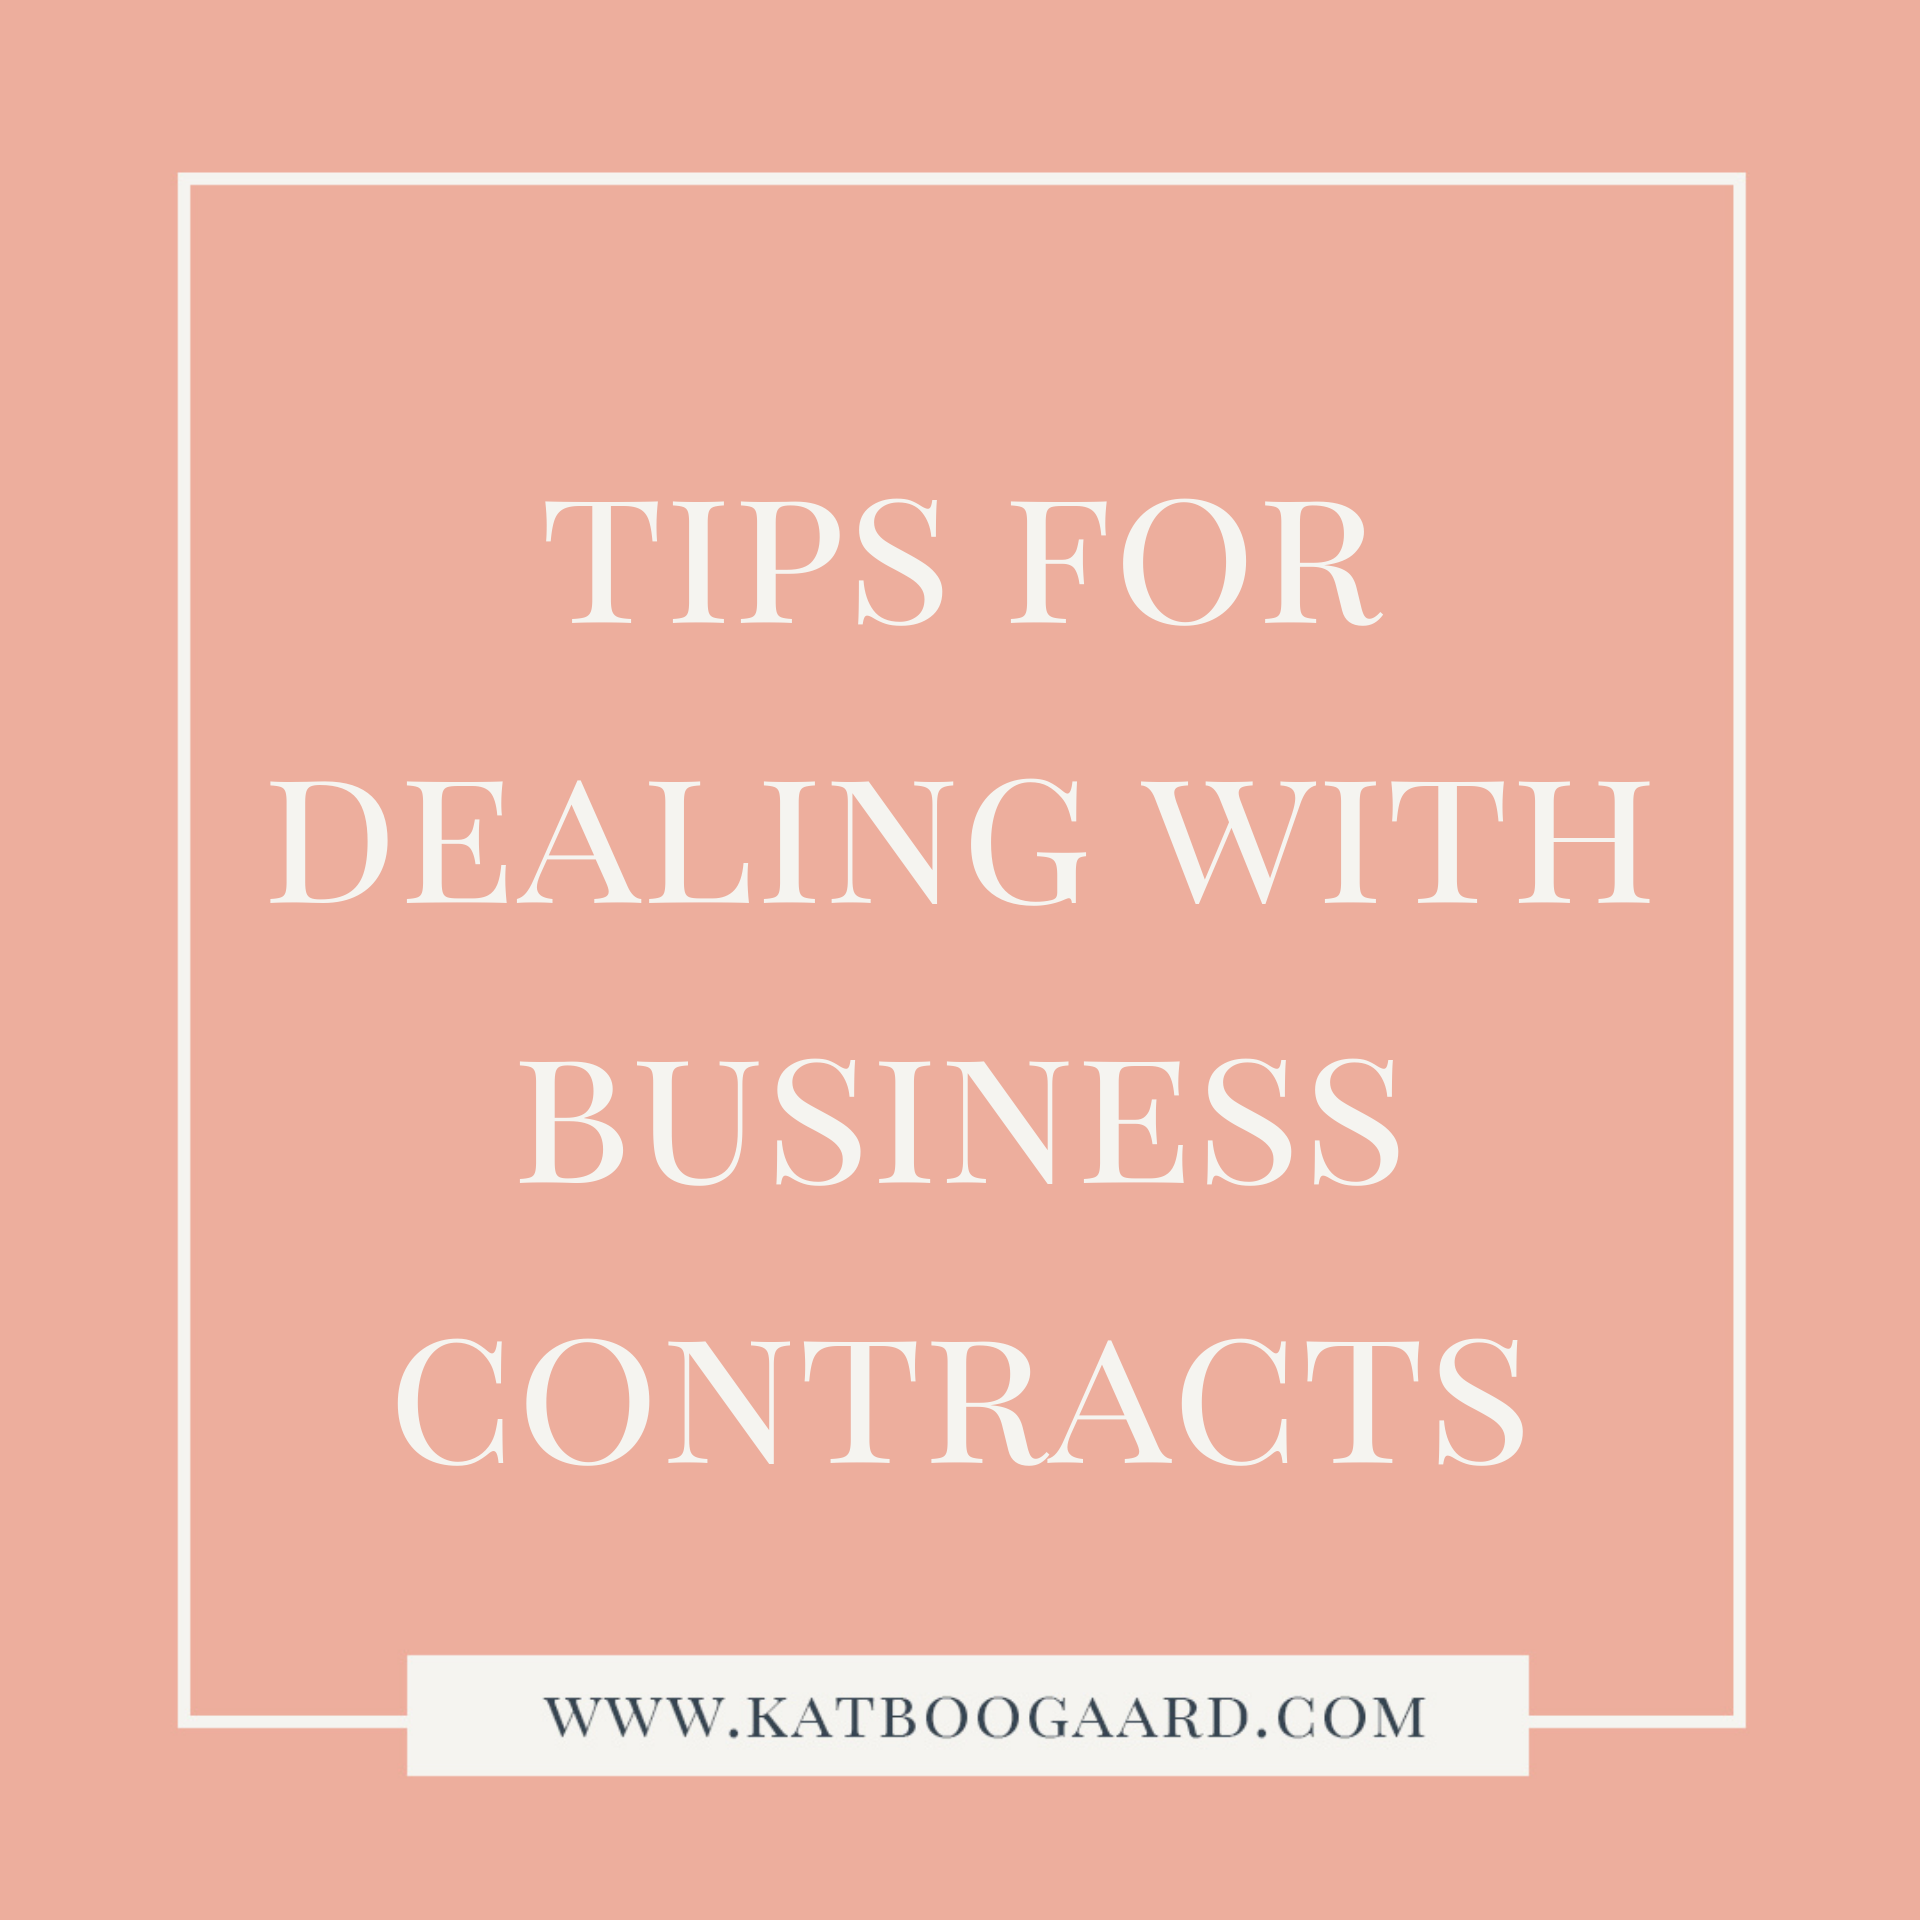 BusinessContracts